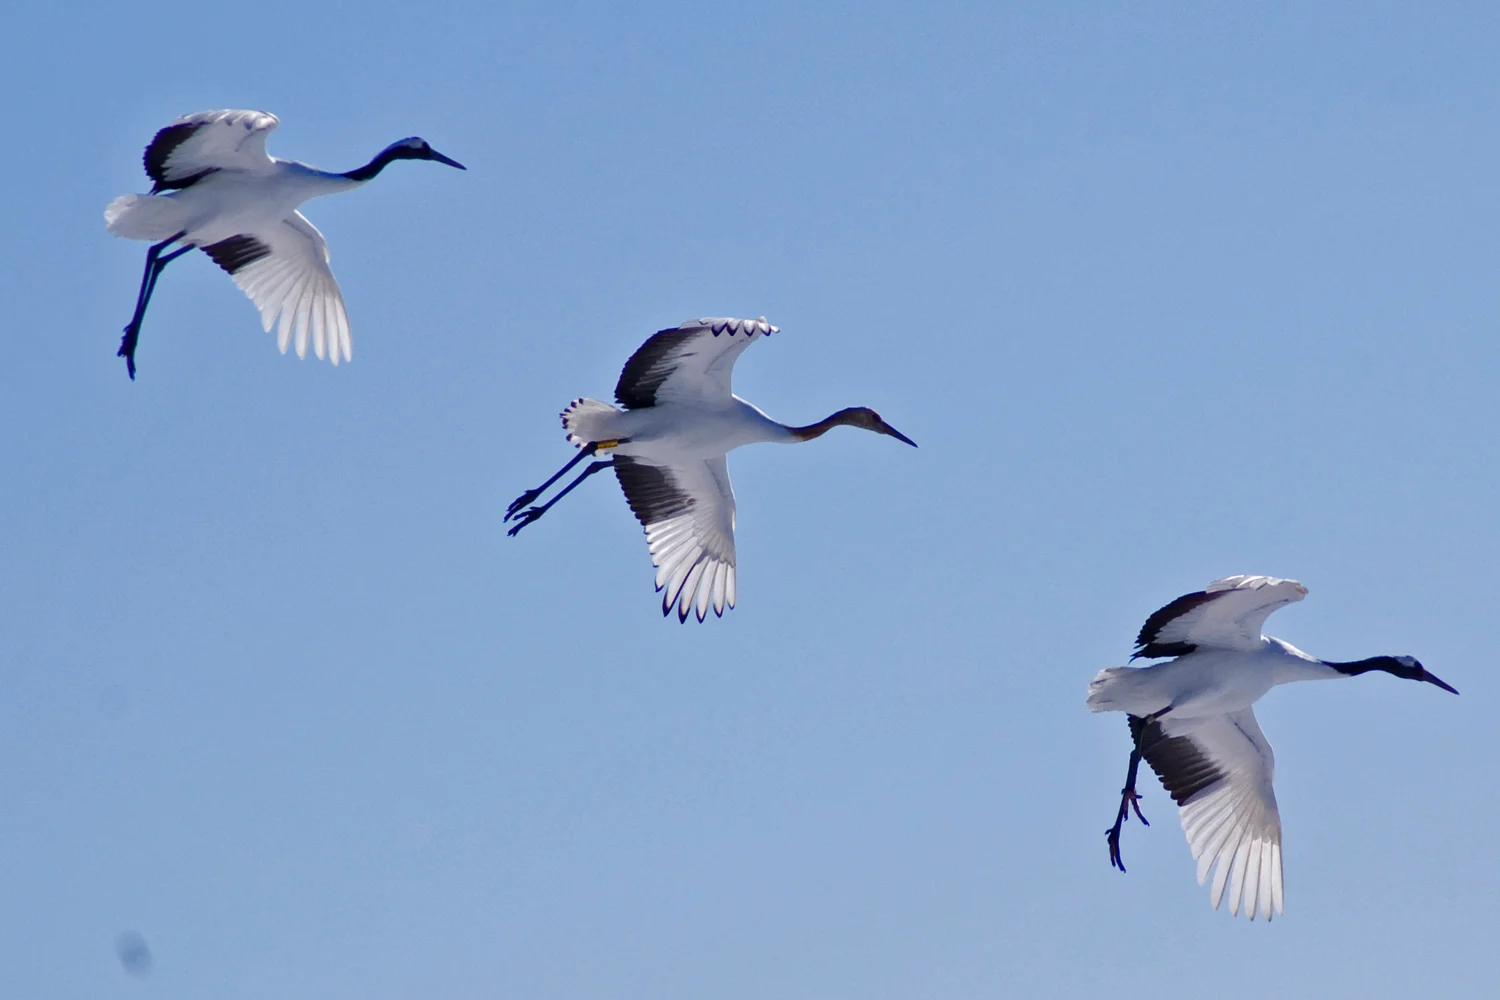 Japanese red-crowned crane observation tour in Hokkaido!